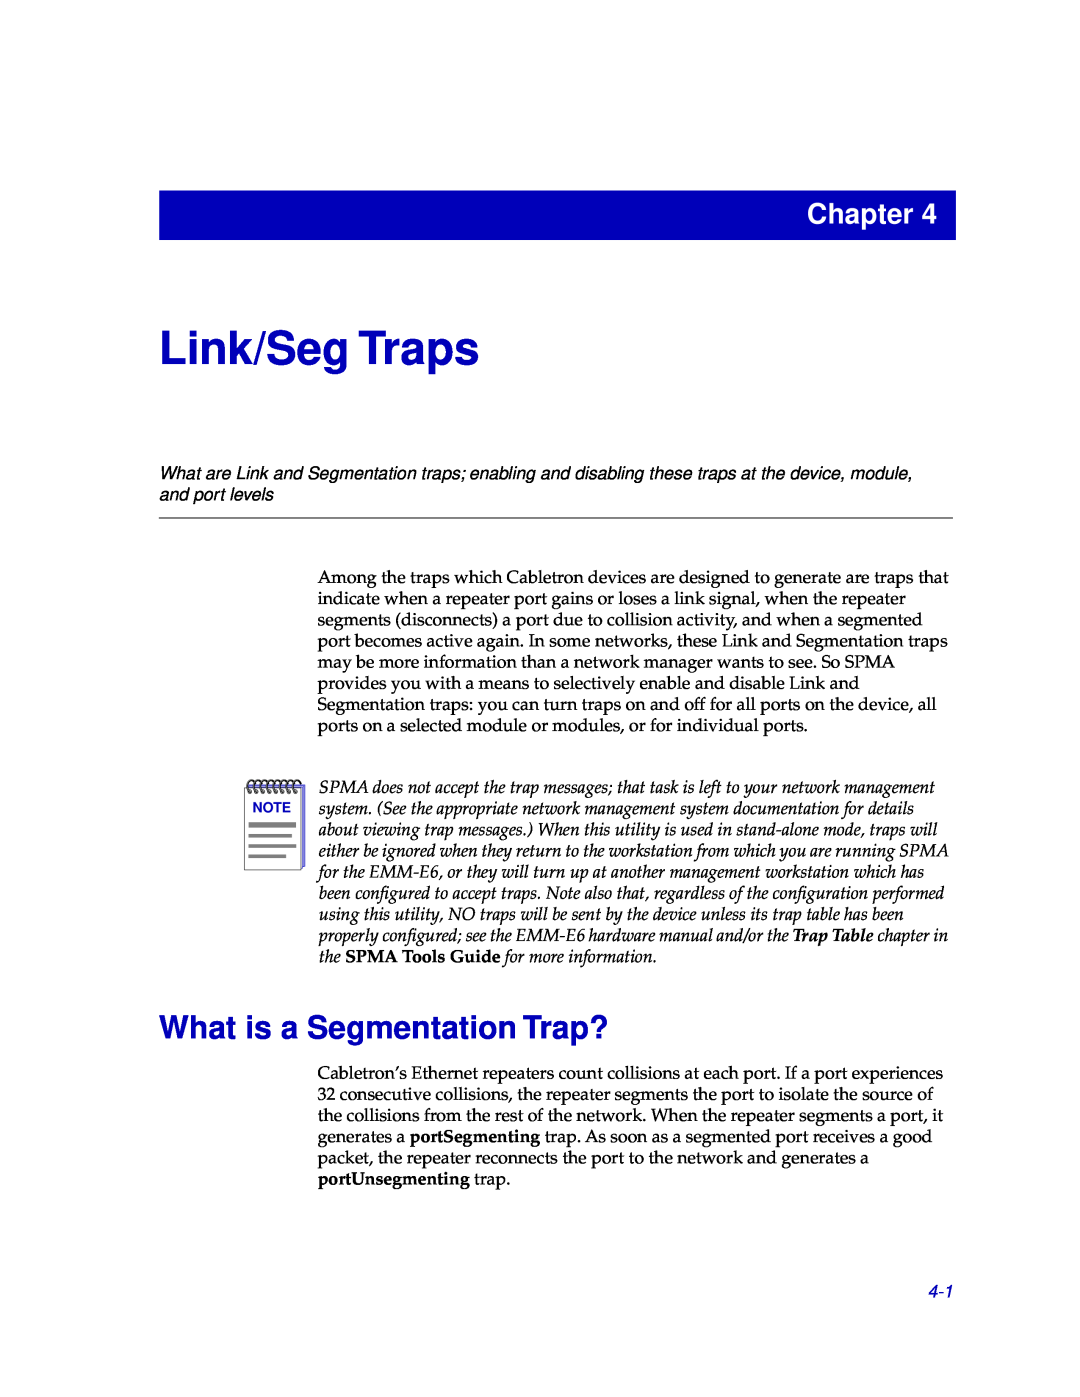 Cabletron Systems EMM-E6 manual Link/Seg Traps, What is a Segmentation Trap?, Chapter 